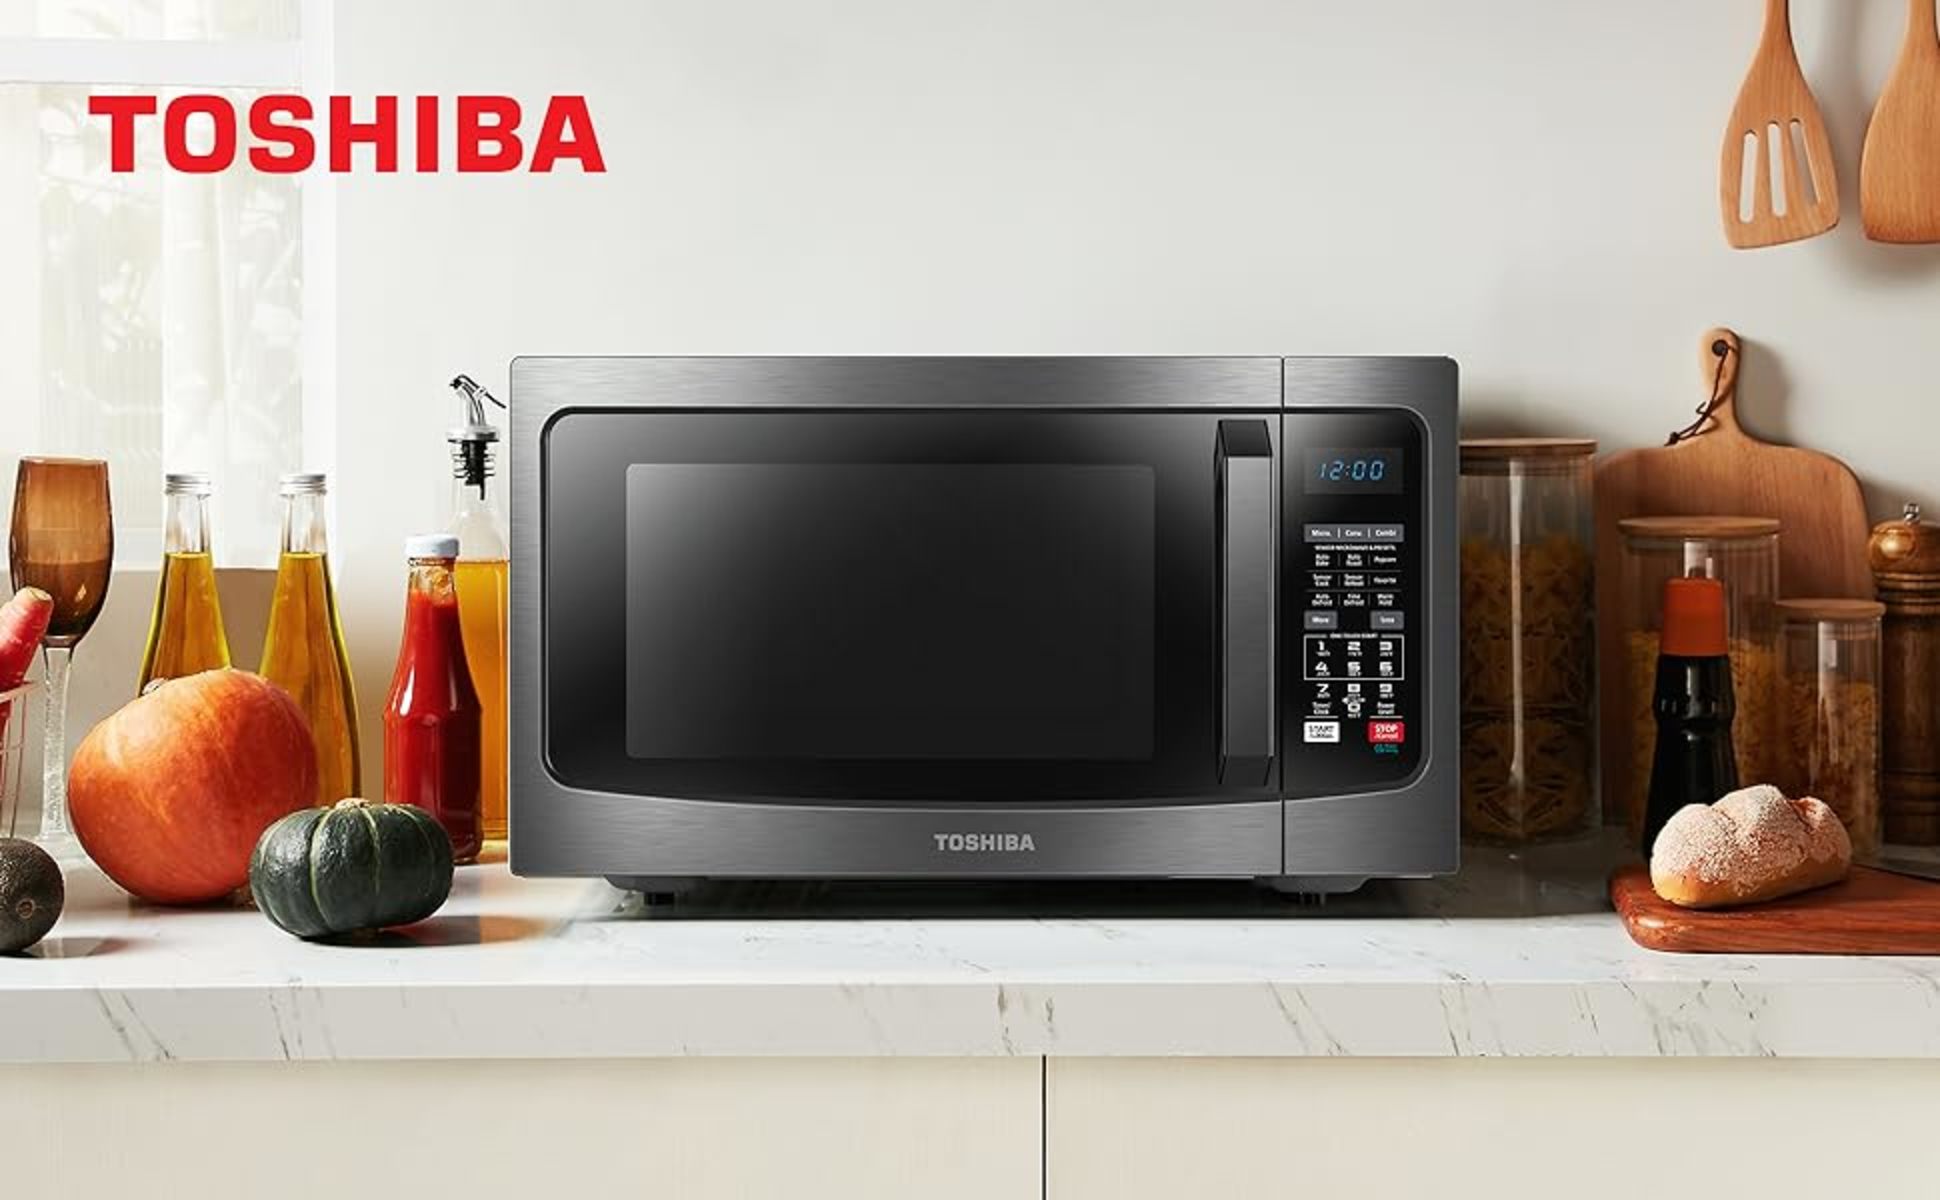 Toshiba 13.6 in. 1.5 cu. ft. with Convection, Smart Sensor Countertop  Microwave 1000 Watt Oven in Stainless Steel EC042A5C-SS - The Home Depot